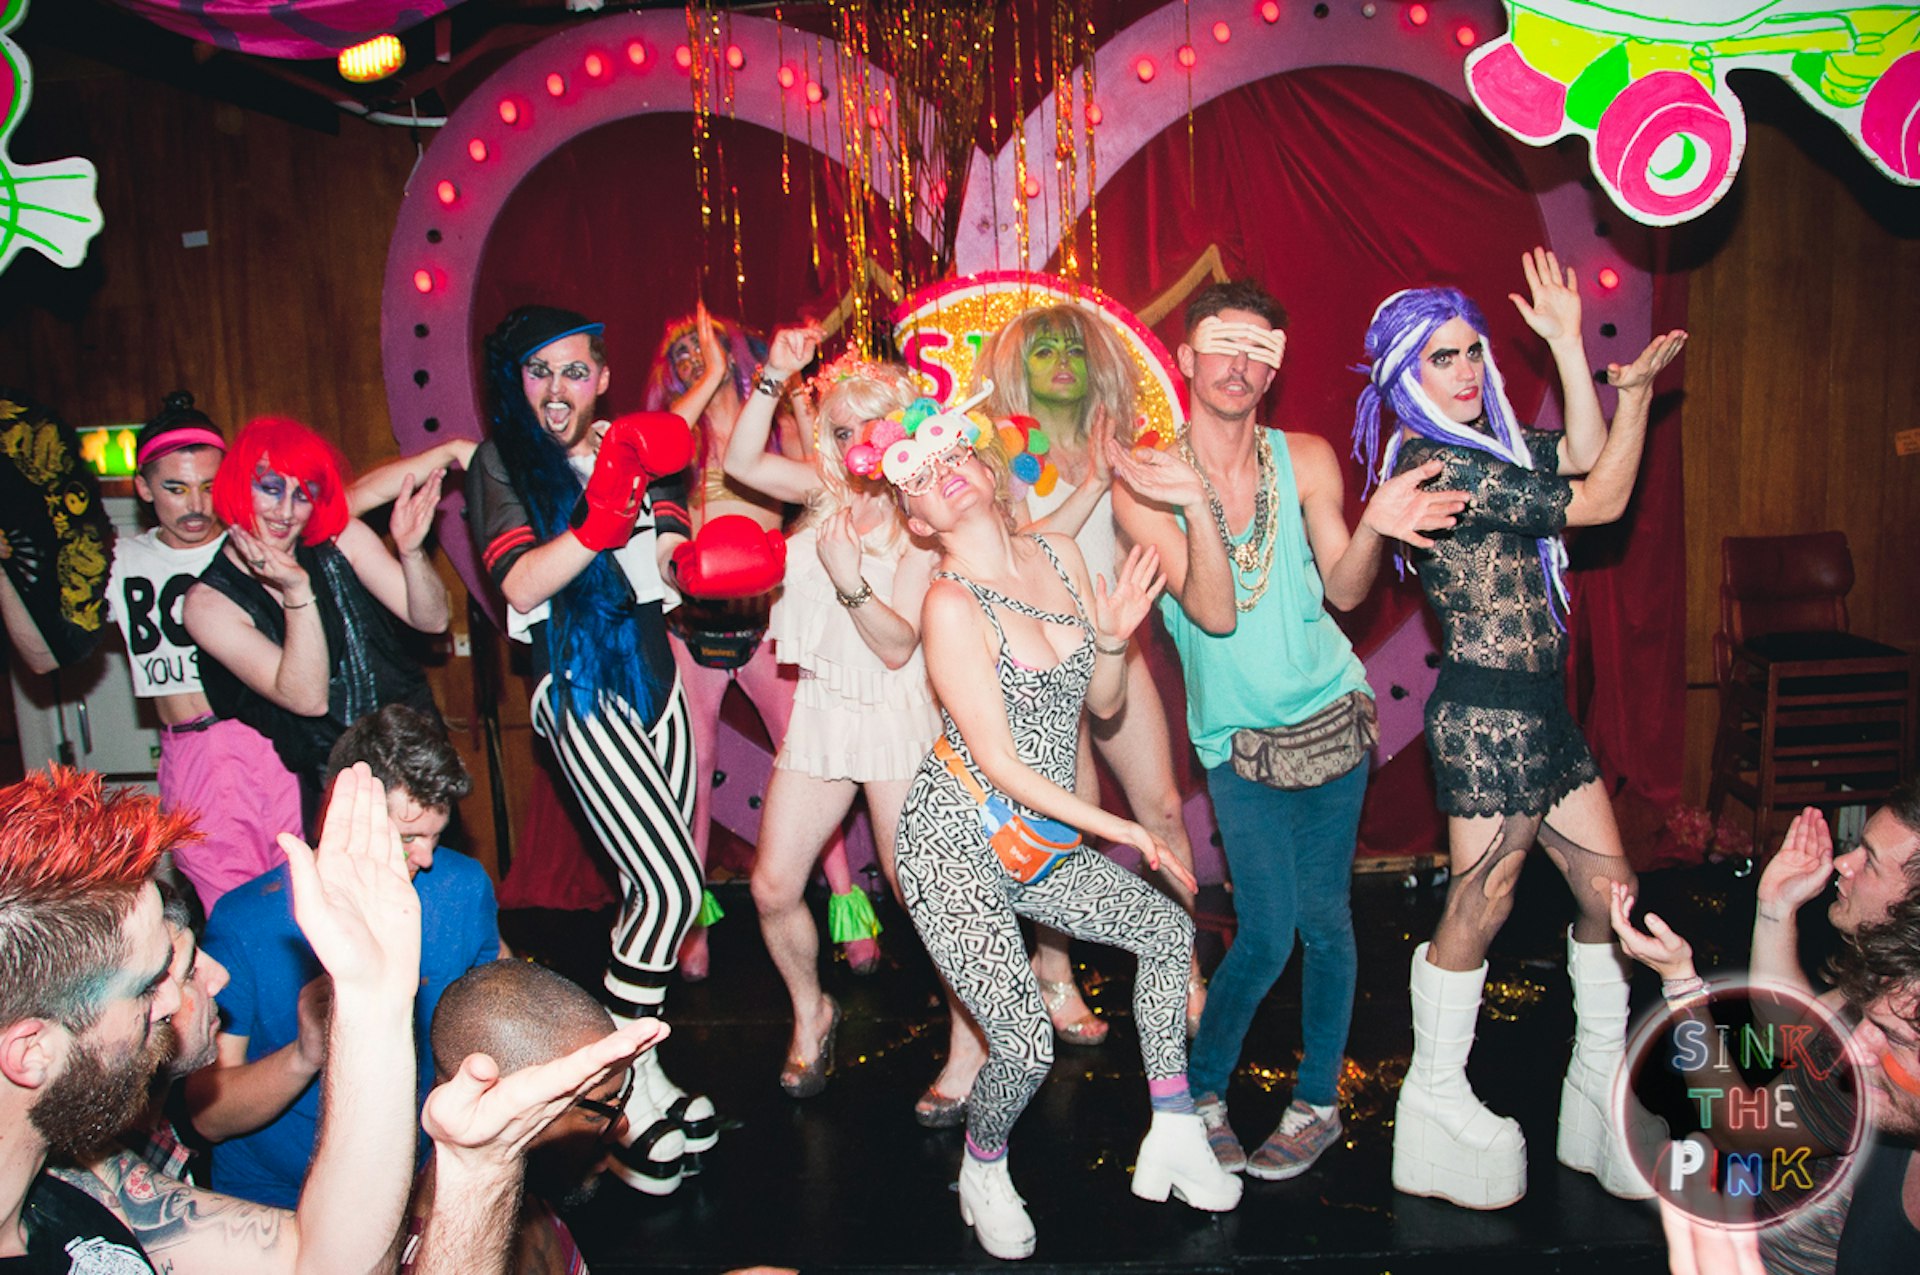 London's DIY drag night that's taking the world by storm